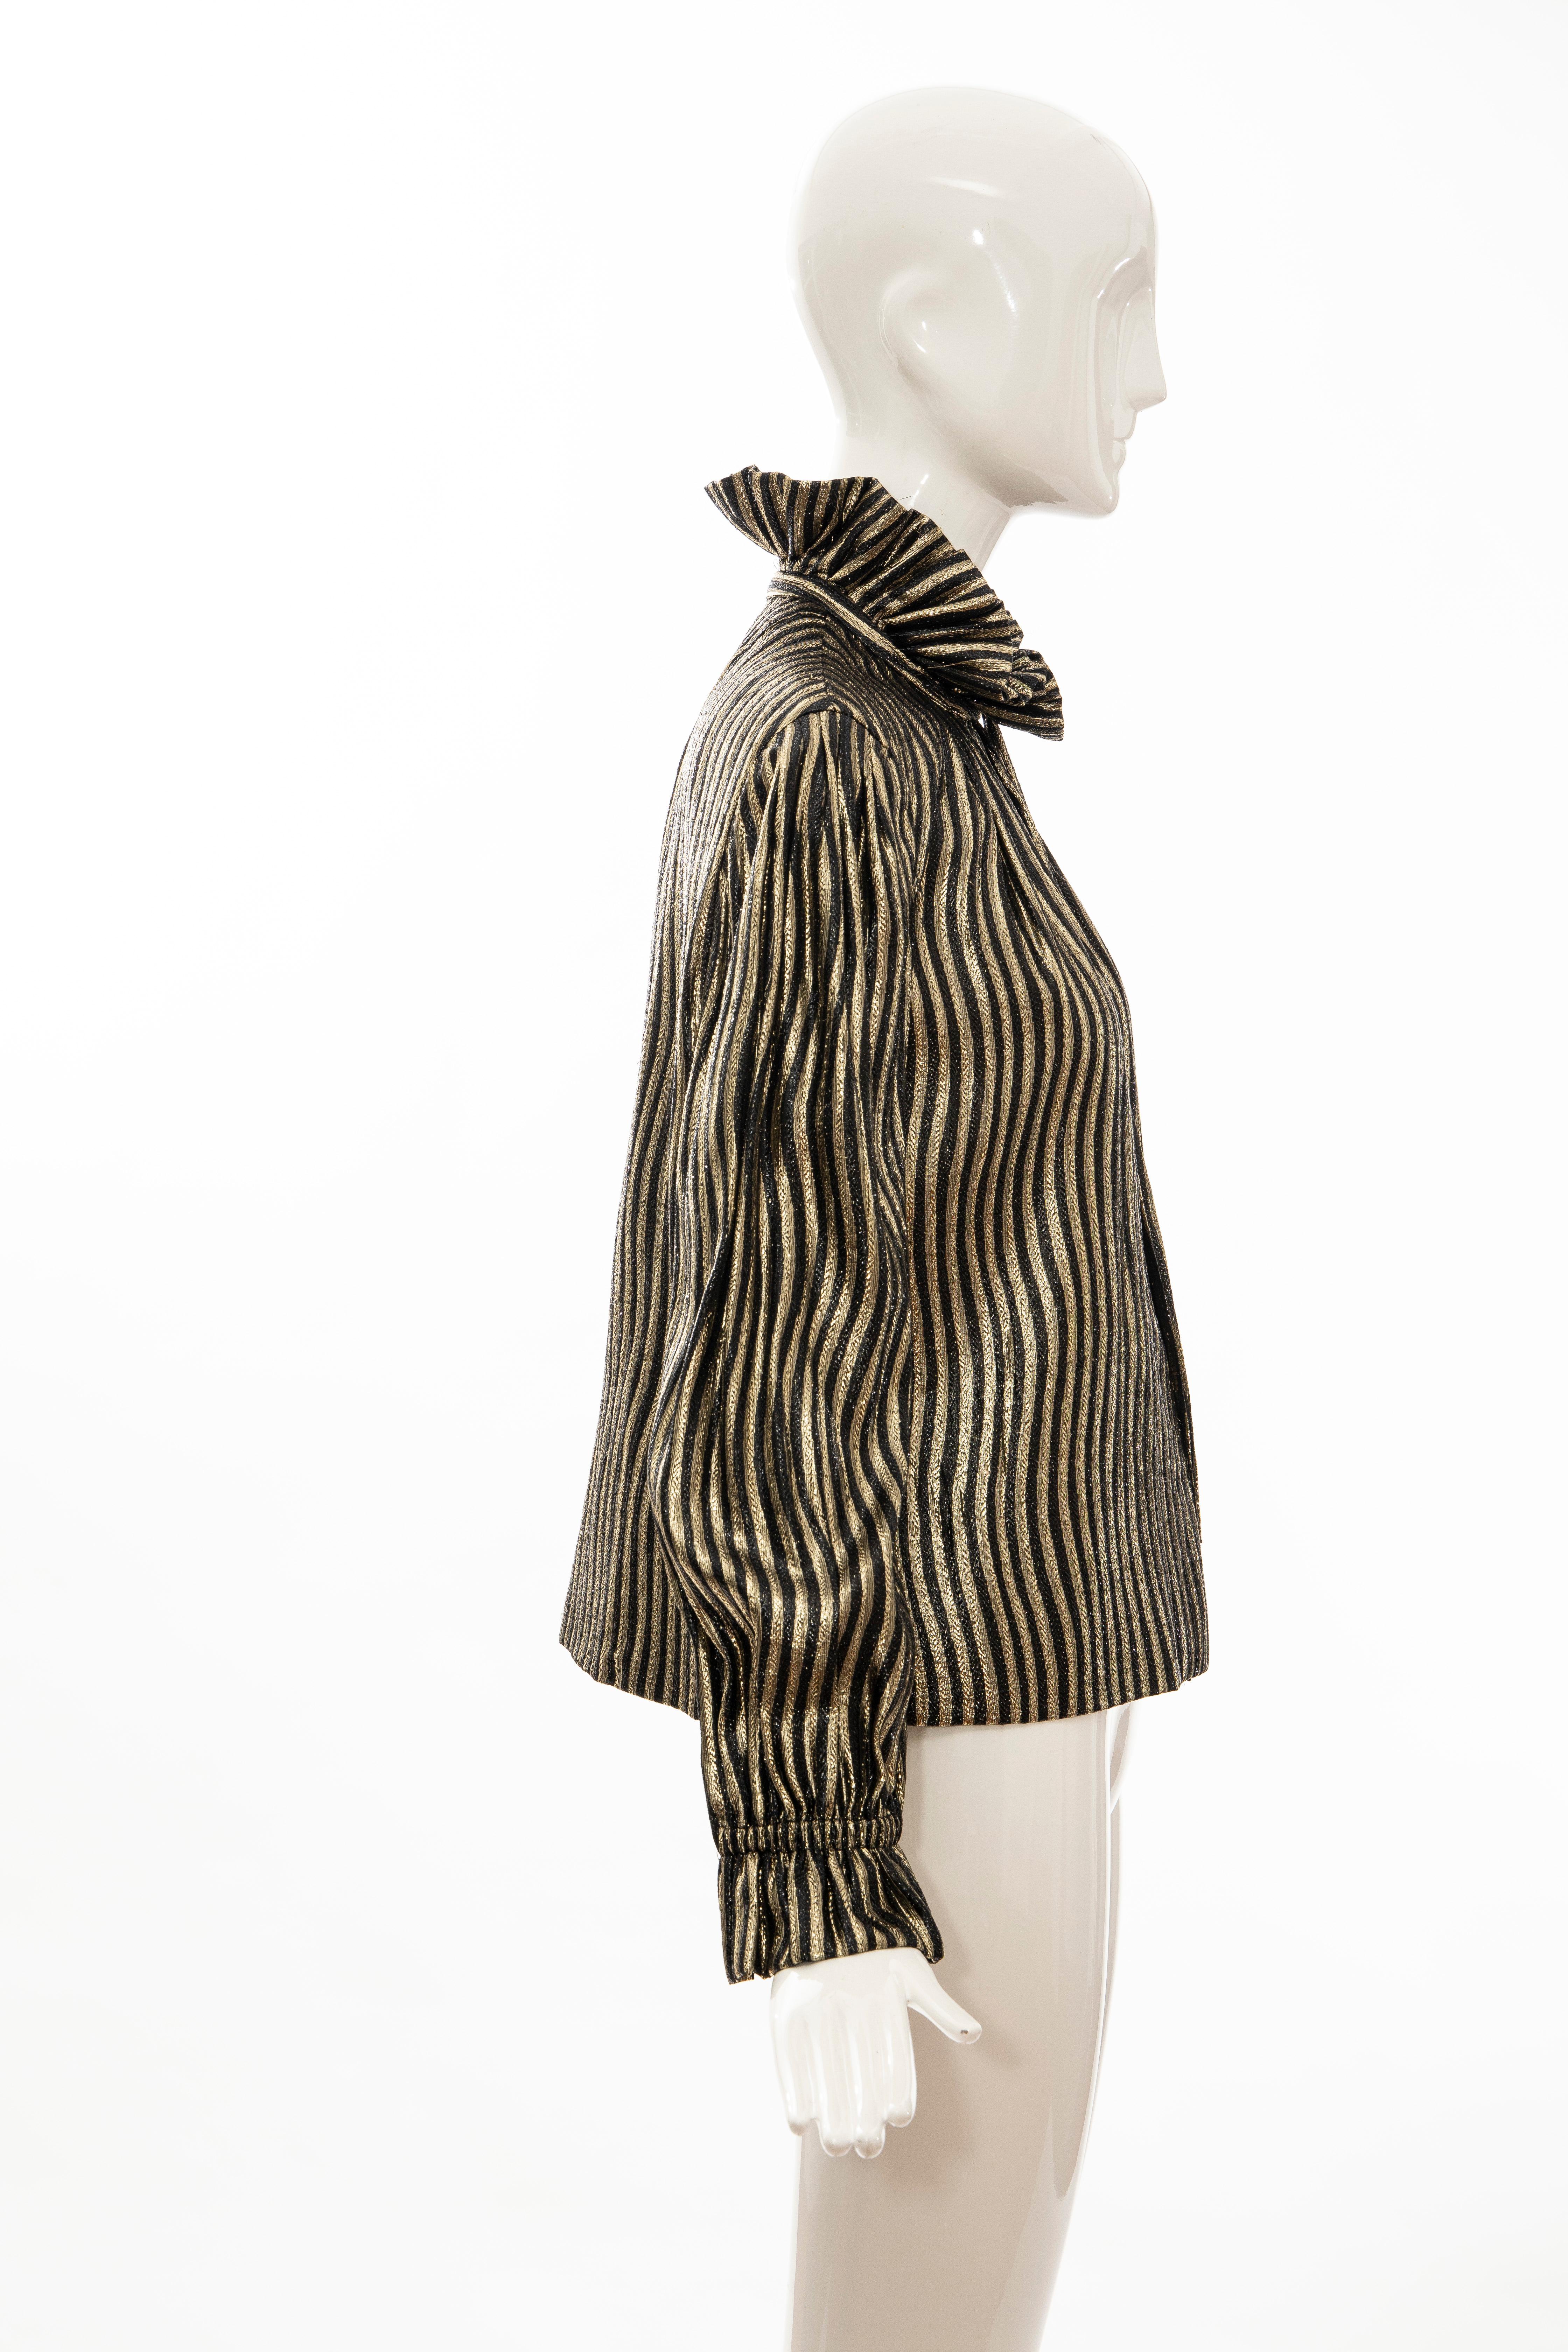 Pauline Trigere Black Gold Striped Metallic Snap Front Blouse, Circa: 1970's For Sale 3